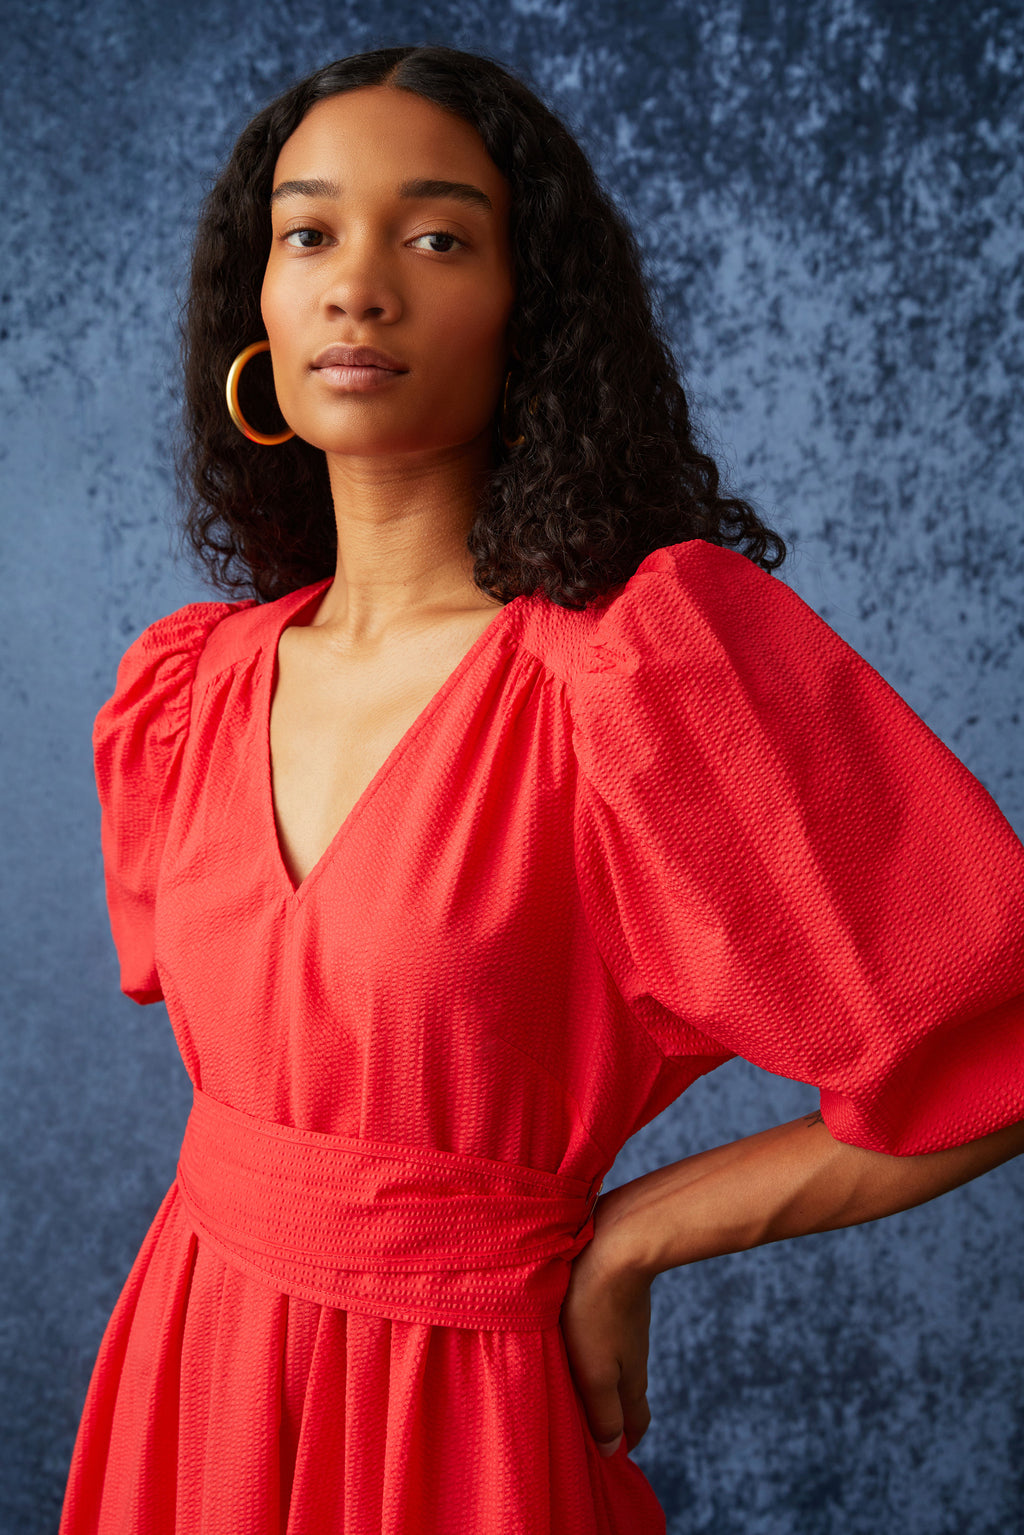 Maxi dress in a bright red color with short puff sleeves and a sash tie belt at the waist